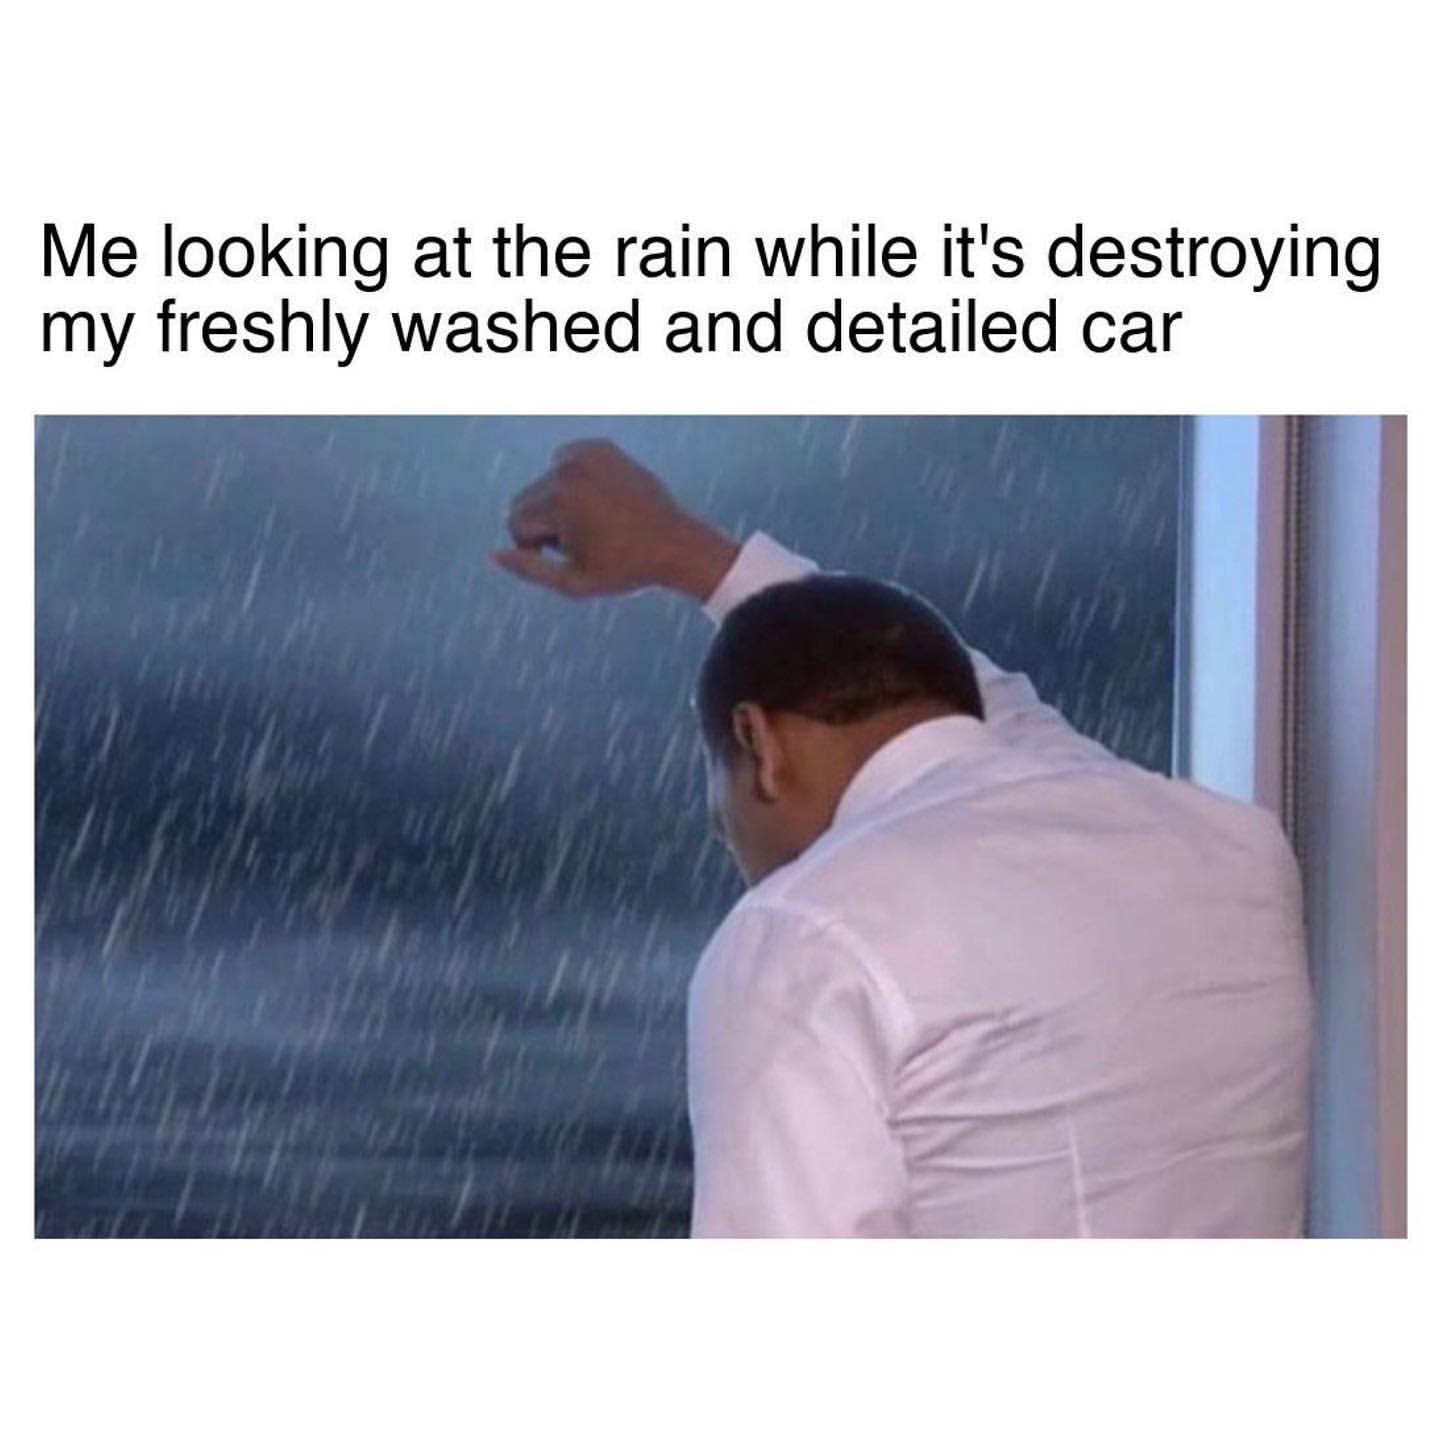 Me looking at the rain while it's destroying my freshly washed and detailed car.